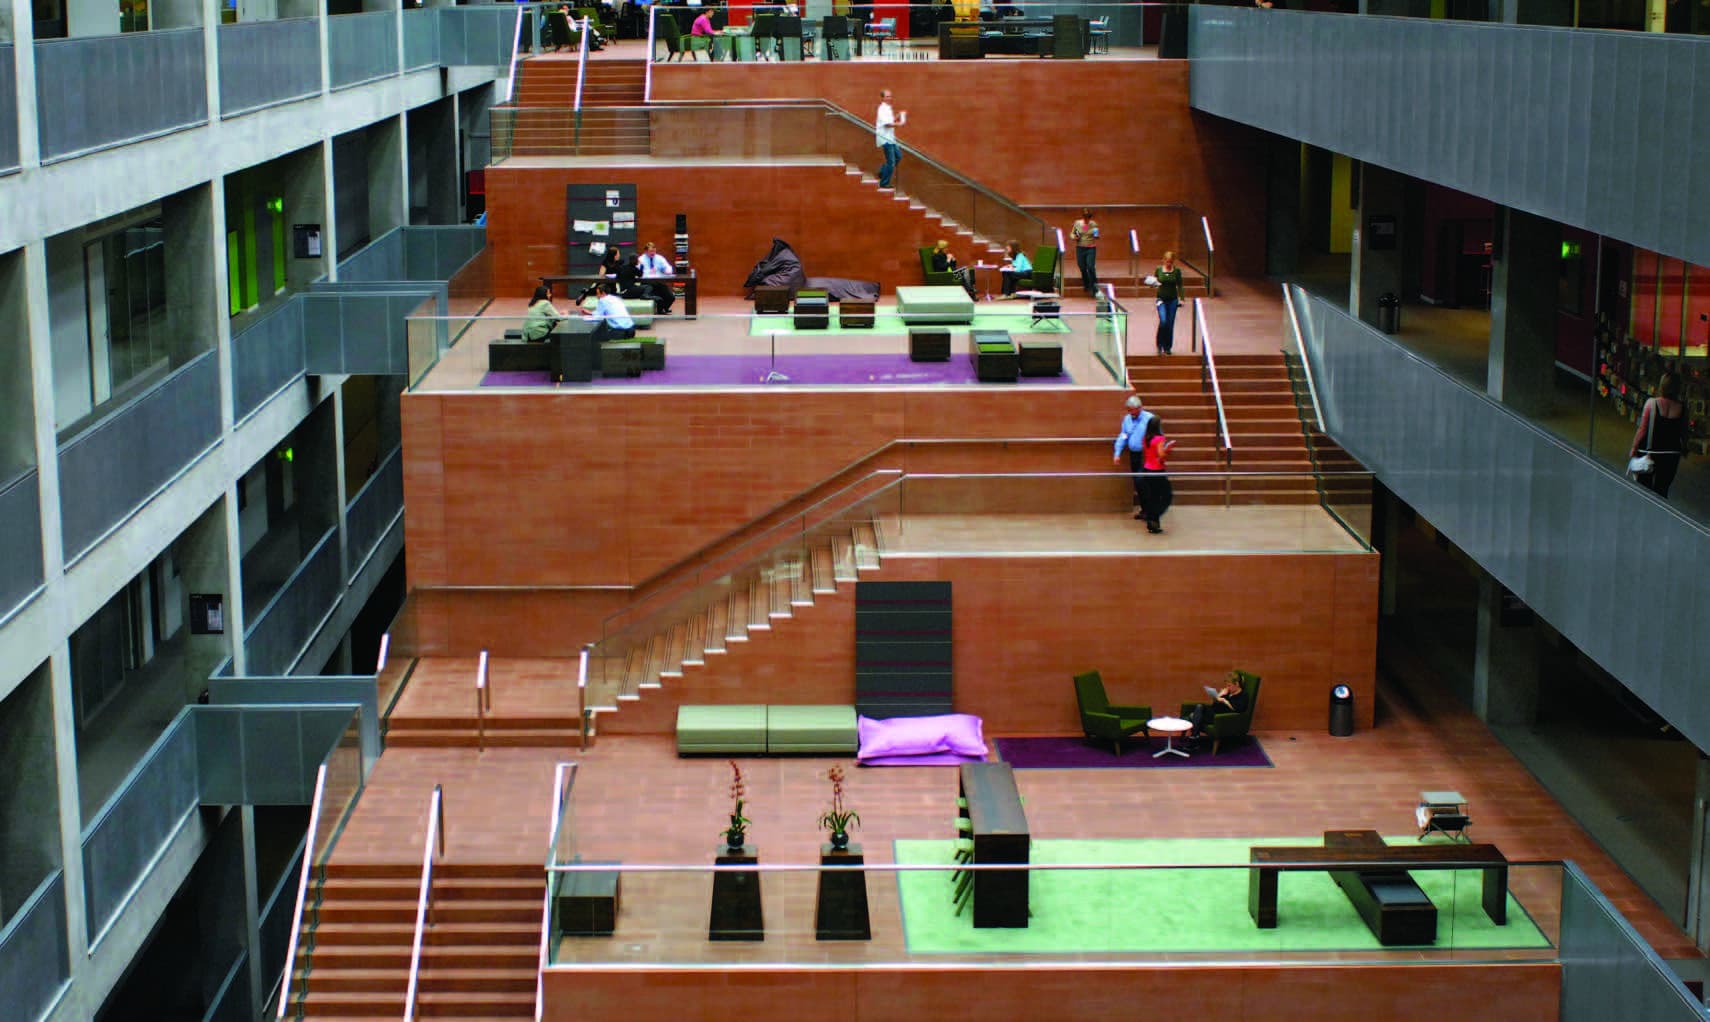 A stone street stairway in a centre of a modern building. Sections of the stairway have seating areas and social spaces.